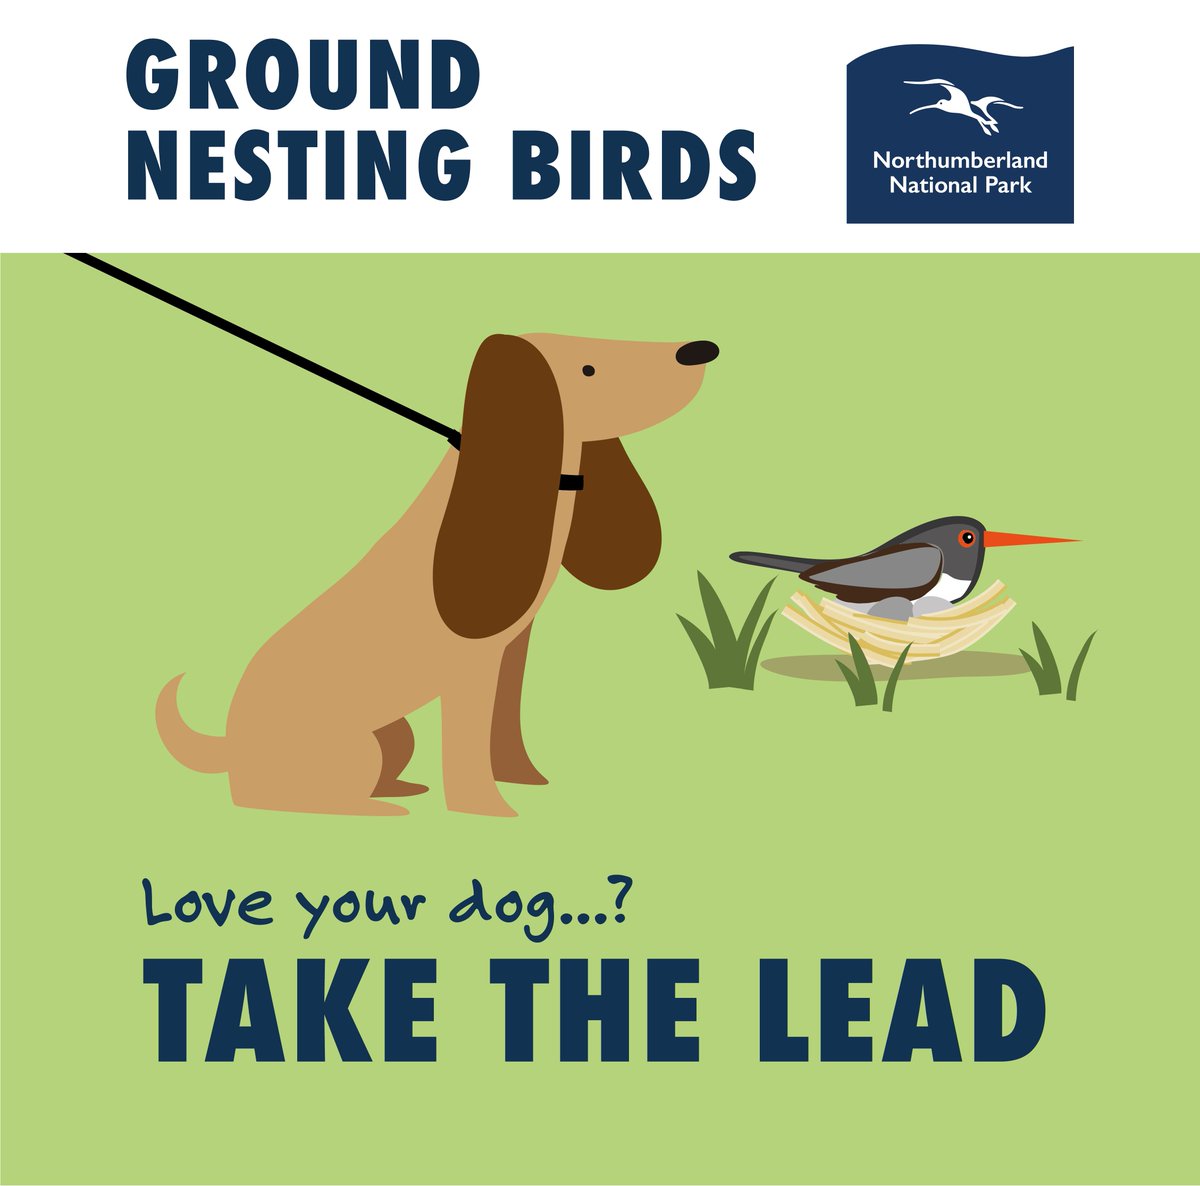 Springtime is when various seasonal ground-nesting bird species such as curlew, oystercatchers, and lapwing return to the National Park to rear their young, leaving them vulnerable if dogs are off leads.  Love your dog? #TakeTheLead